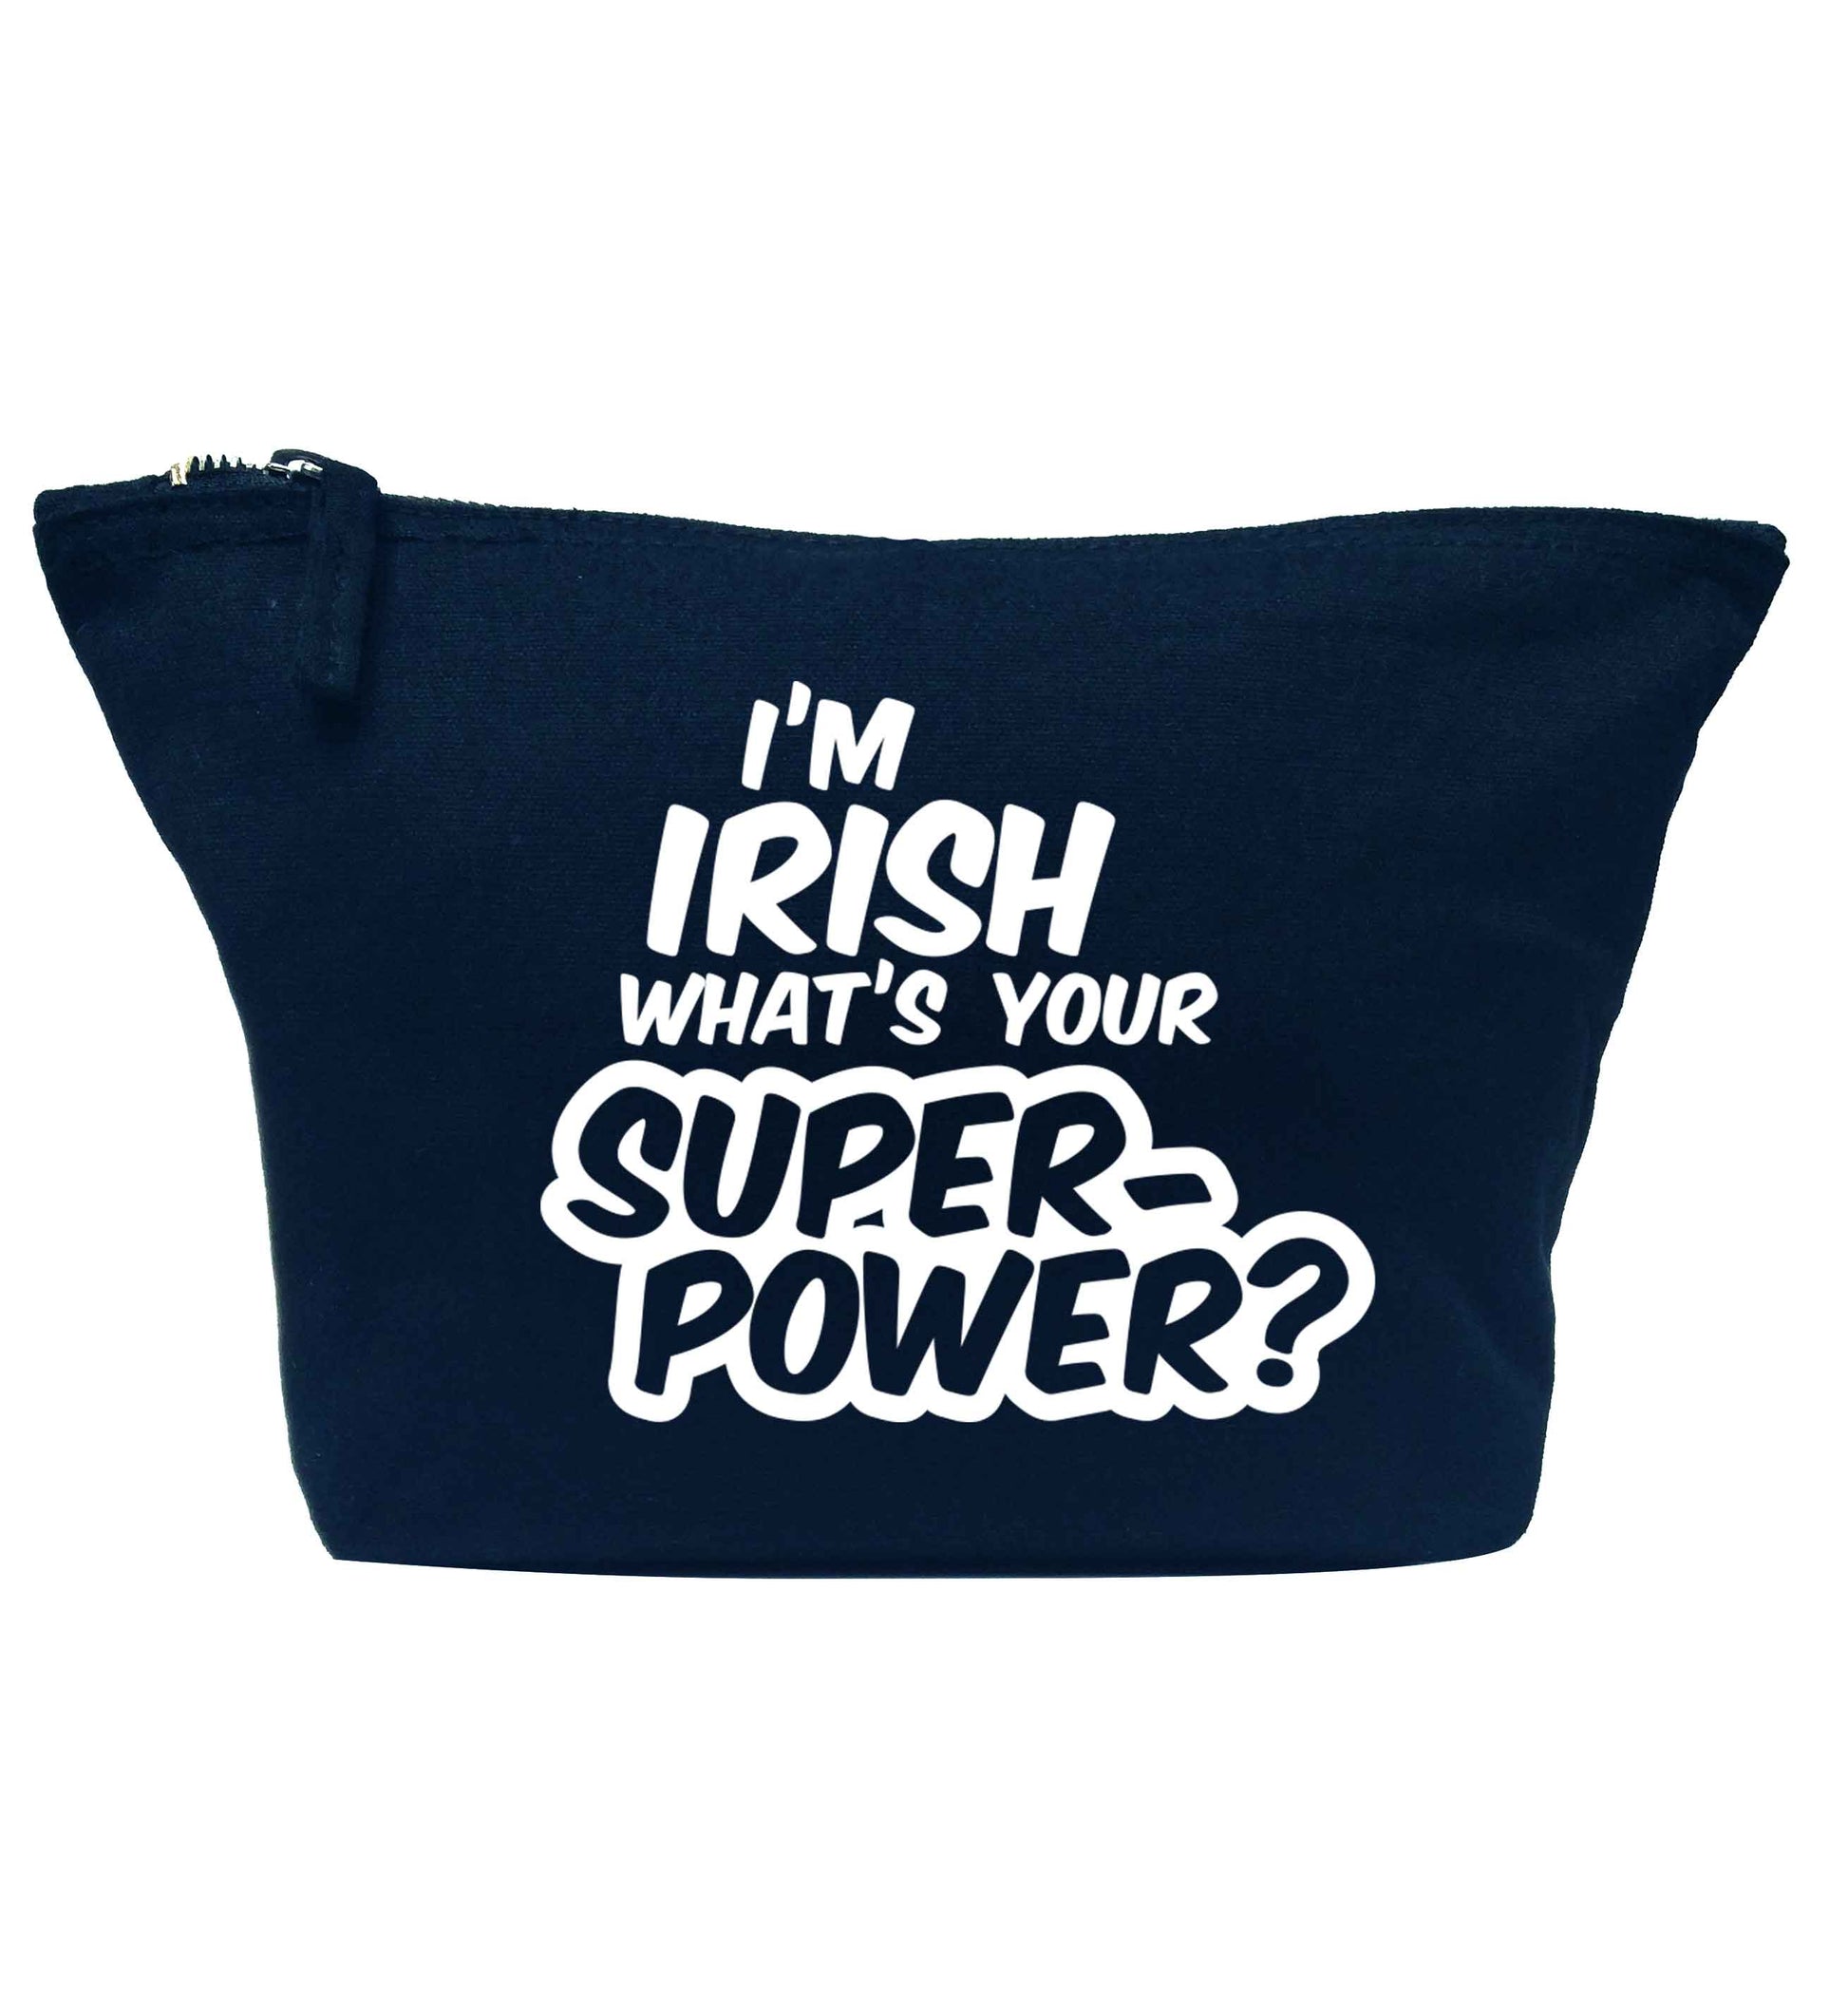 I'm Irish what's your superpower? navy makeup bag